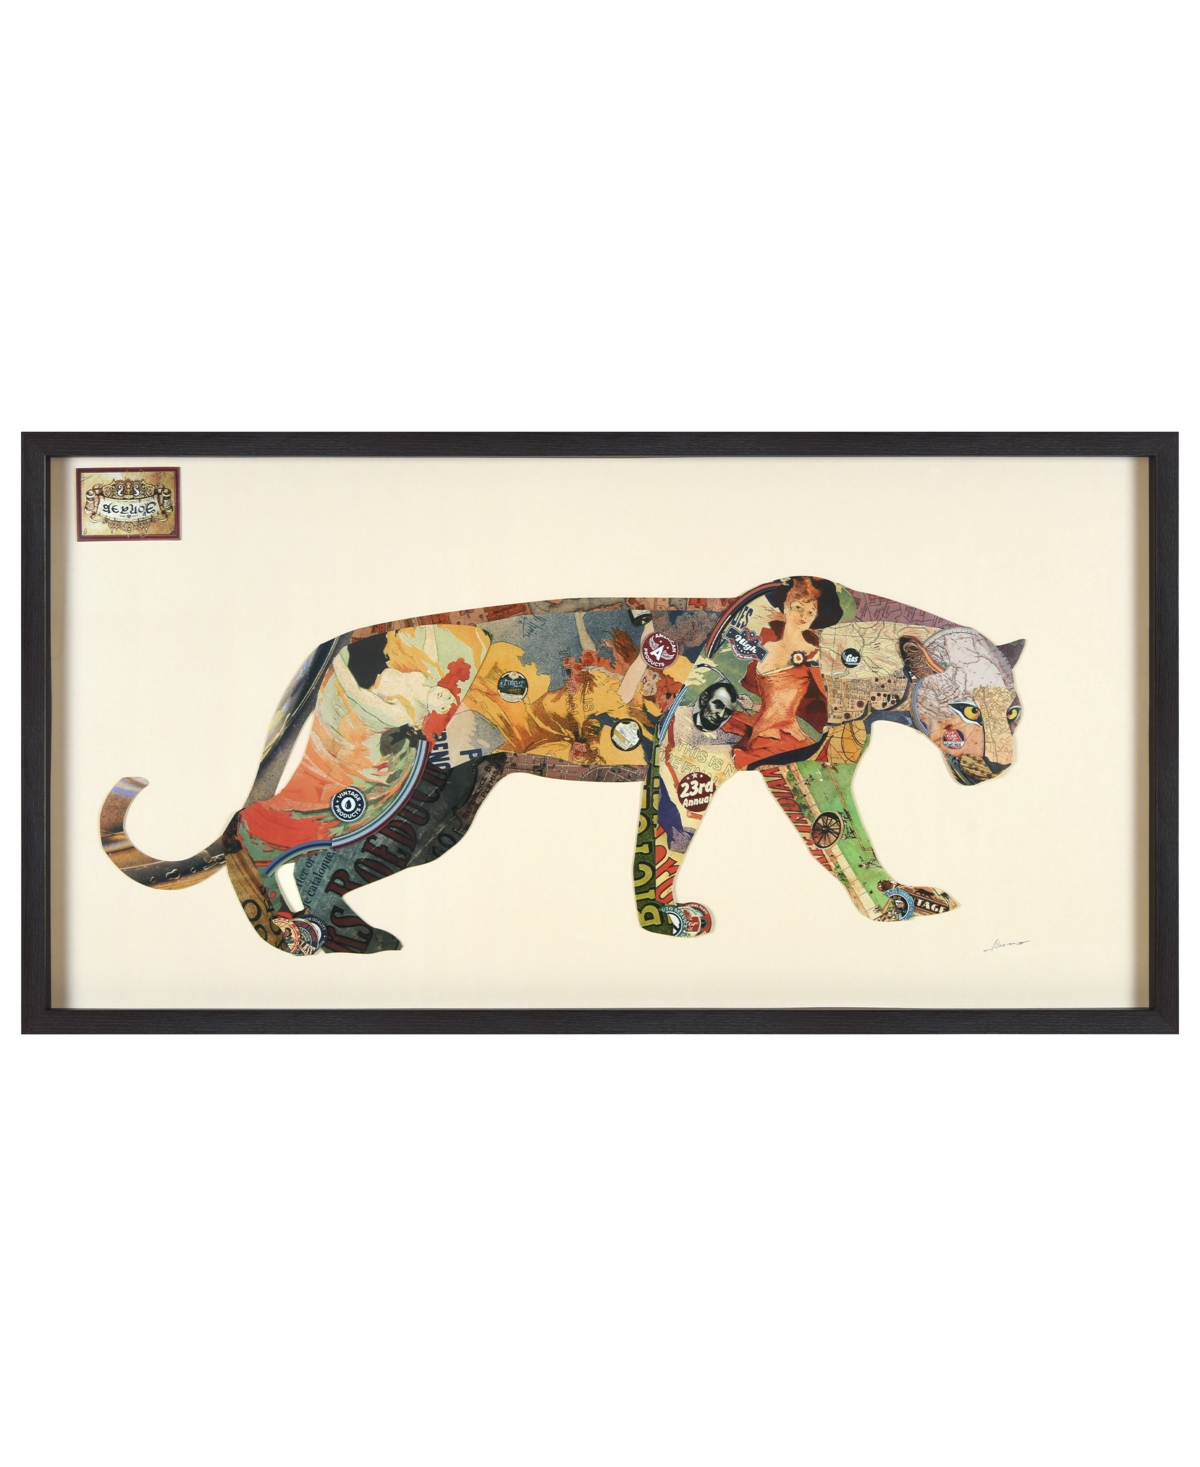 Empire Art Direct "the Jaguar" Dimensional Collage Framed Graphic Art Under Glass Wall Art, 25" X 48" X 1.4" In Multi-color